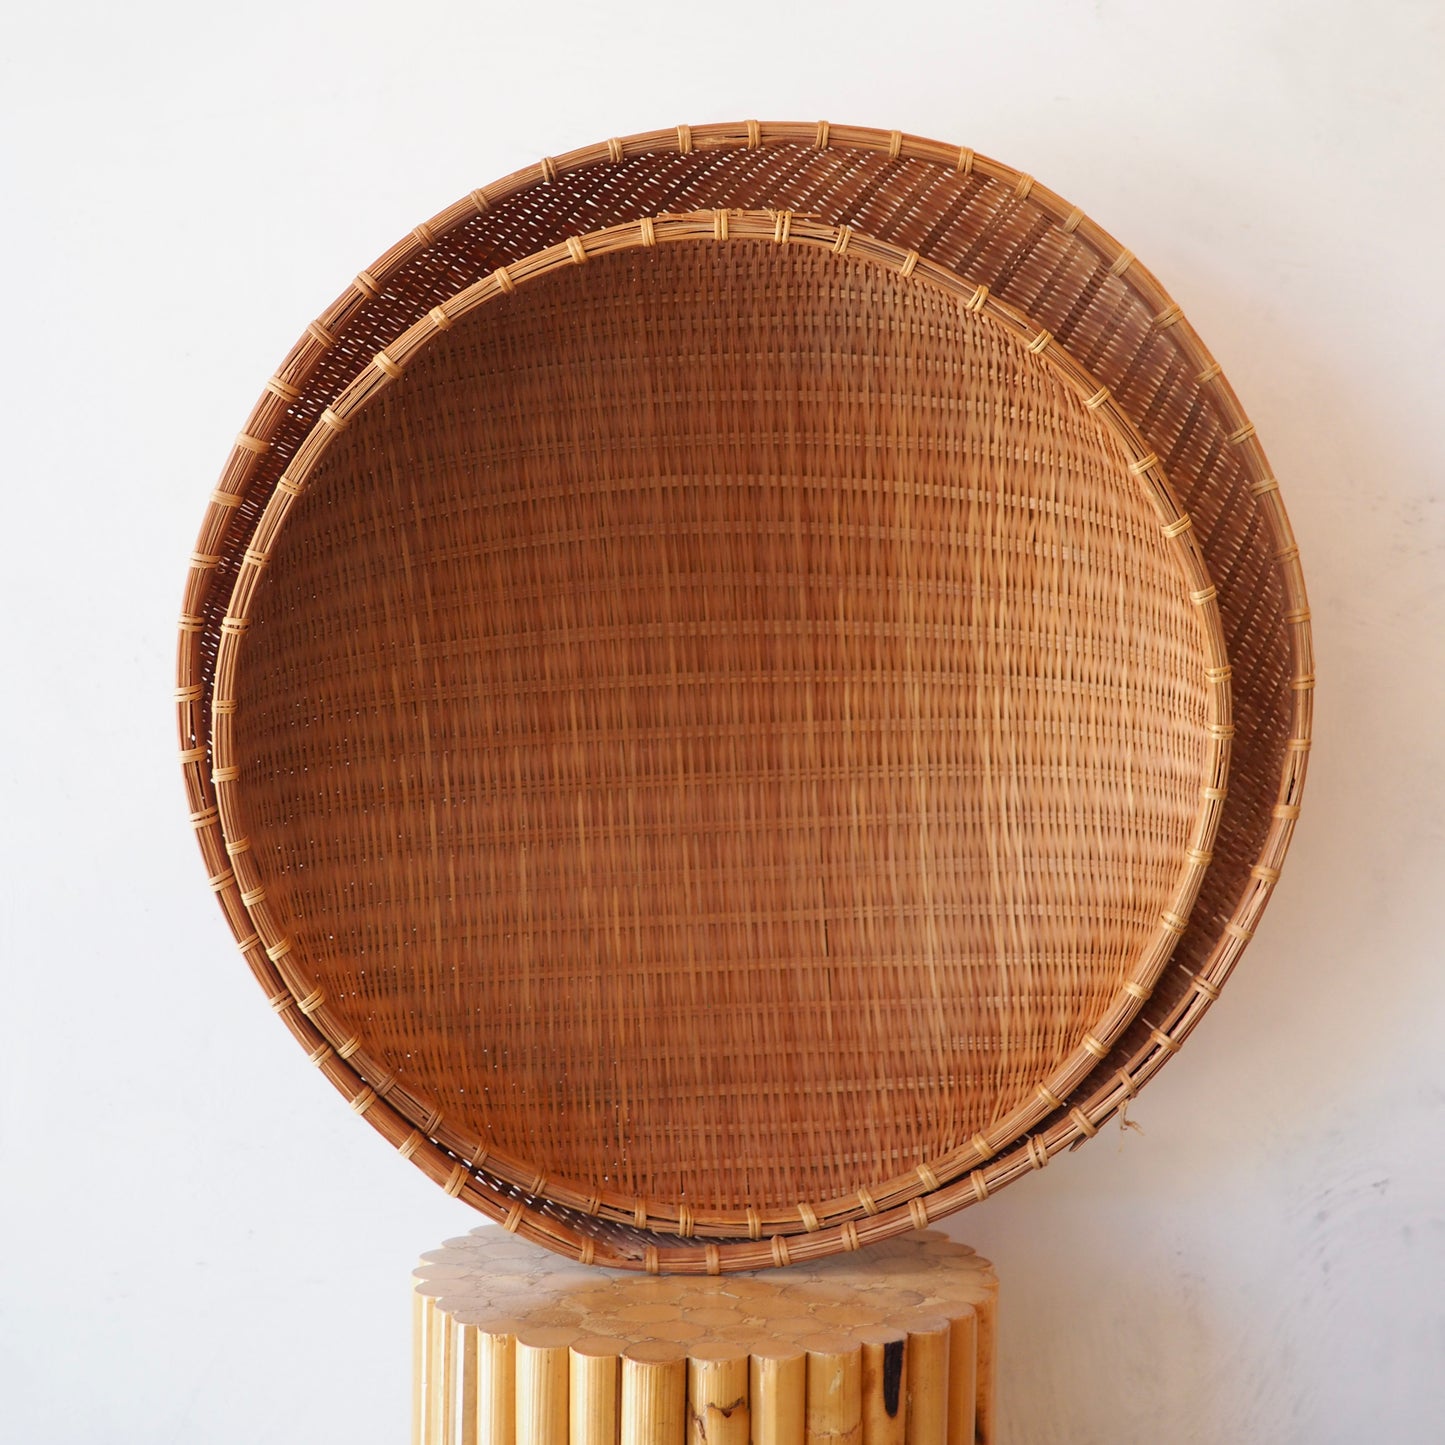 Hand-Woven Wicker Round Baskets - LG and MED